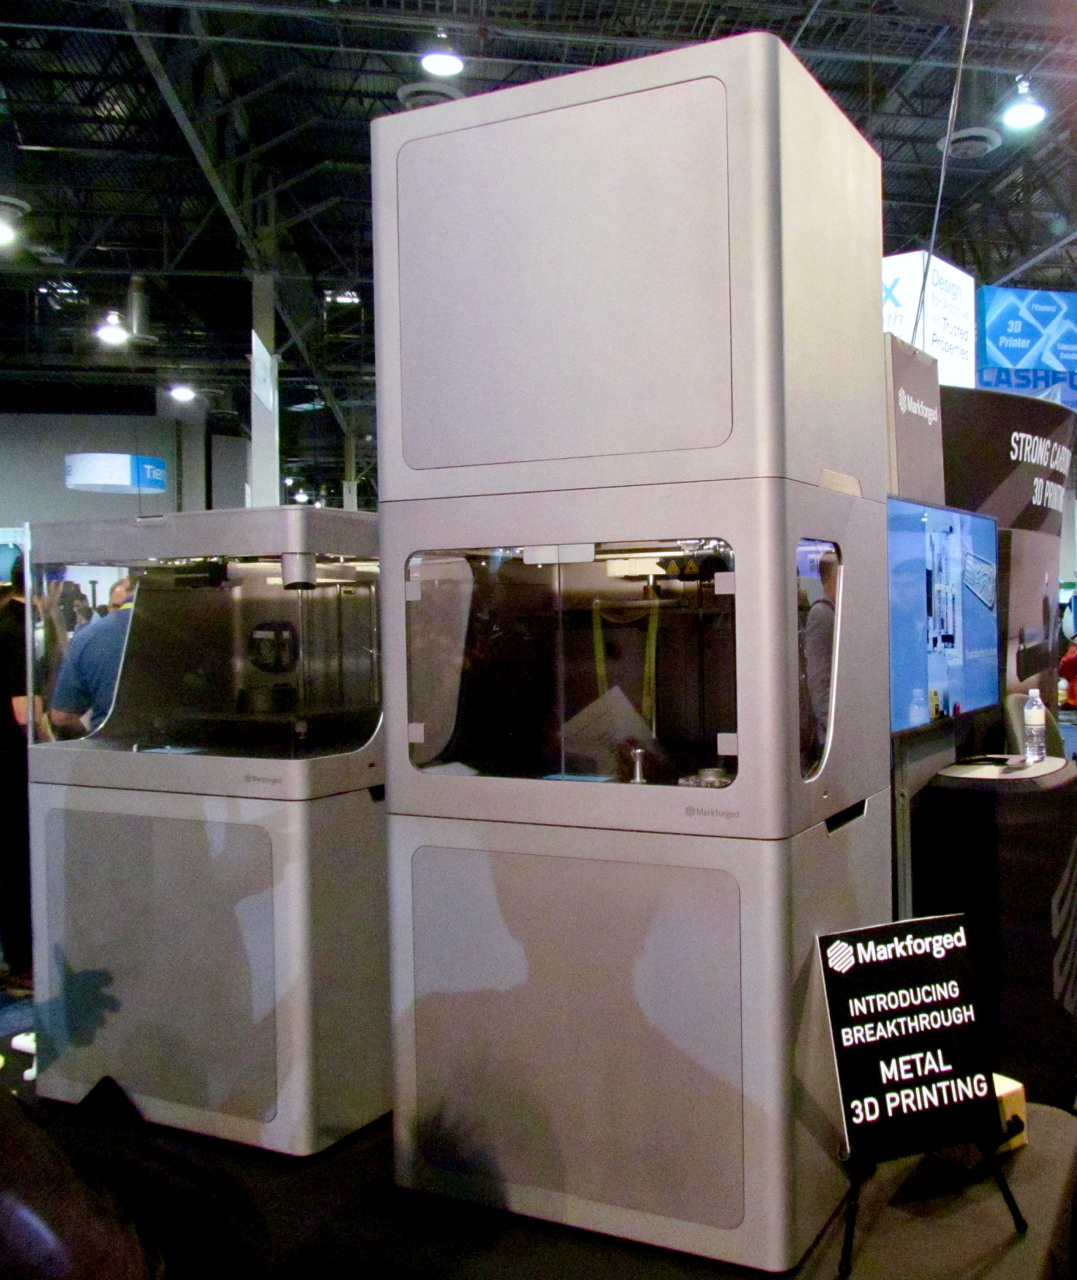  The Markforged Metal X (on the right) 3D metal printer, beside one of its non-metal siblings 